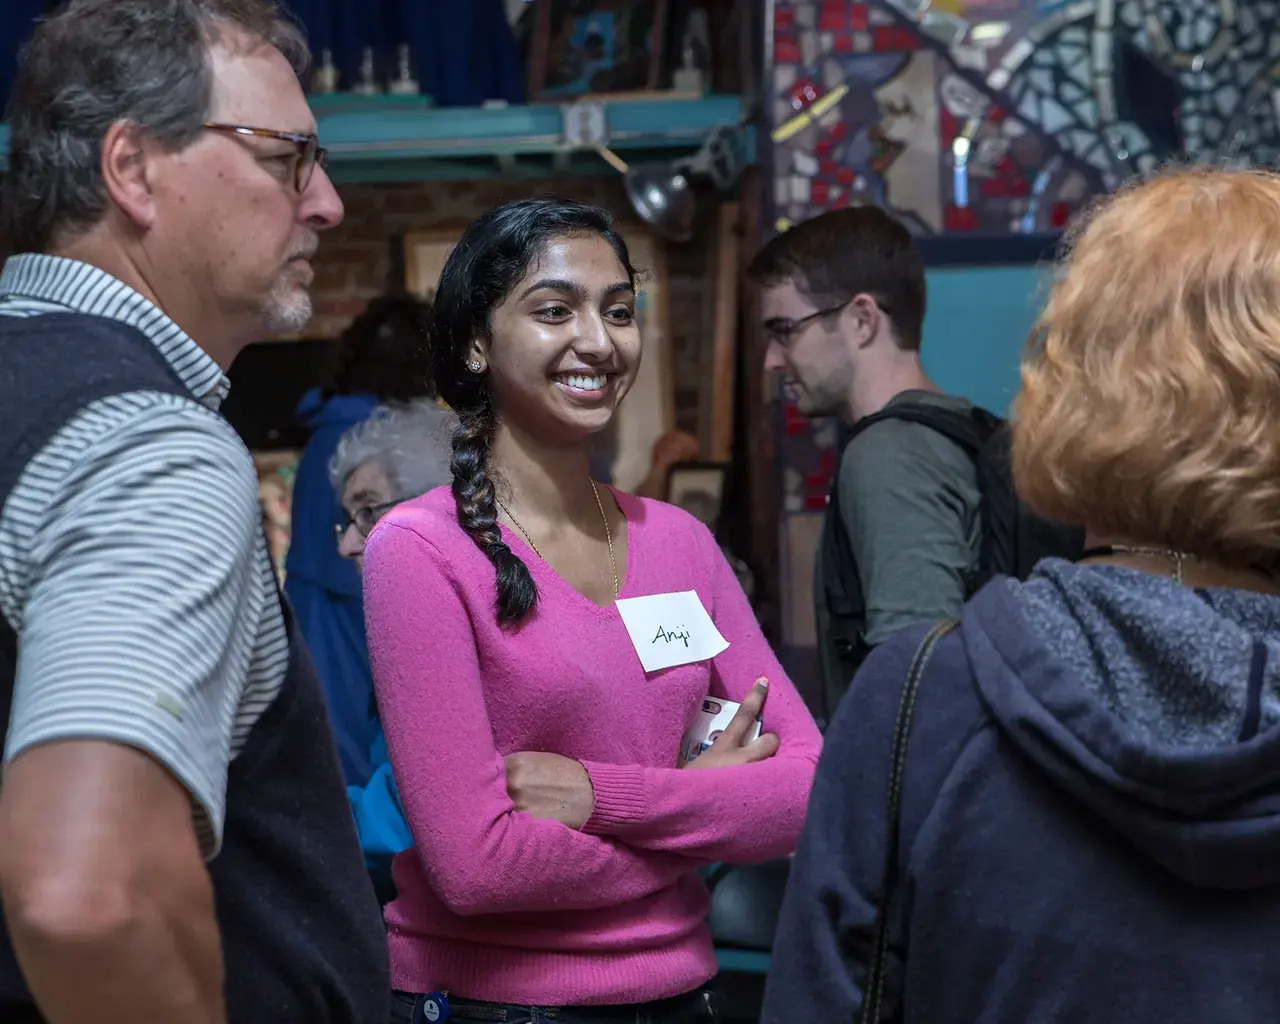 First-year Jefferson medical student Anji R. and mentors Mike S. and Mary Anne S. at Philadelphia&rsquo;s Magic Gardens. Photo by Jonas Denzel and Christian Hays.